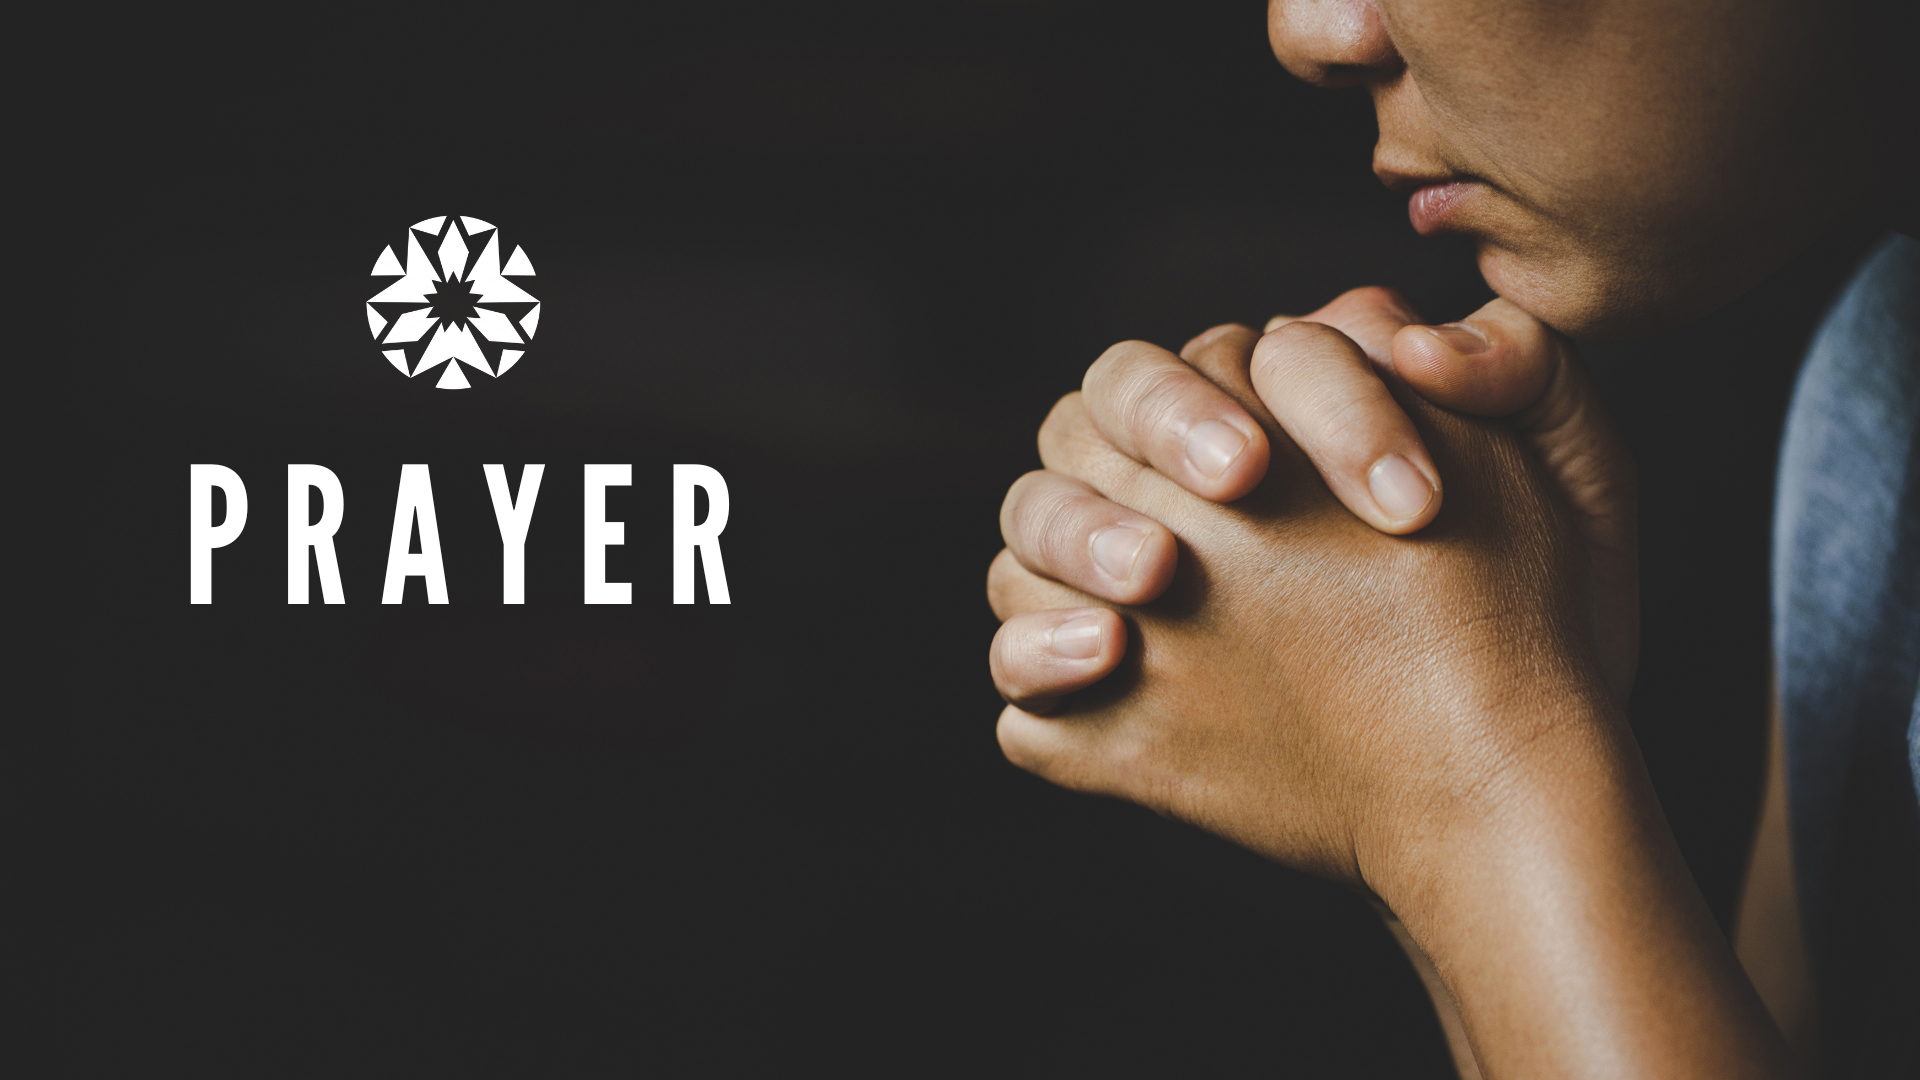 Our Need for Prayer